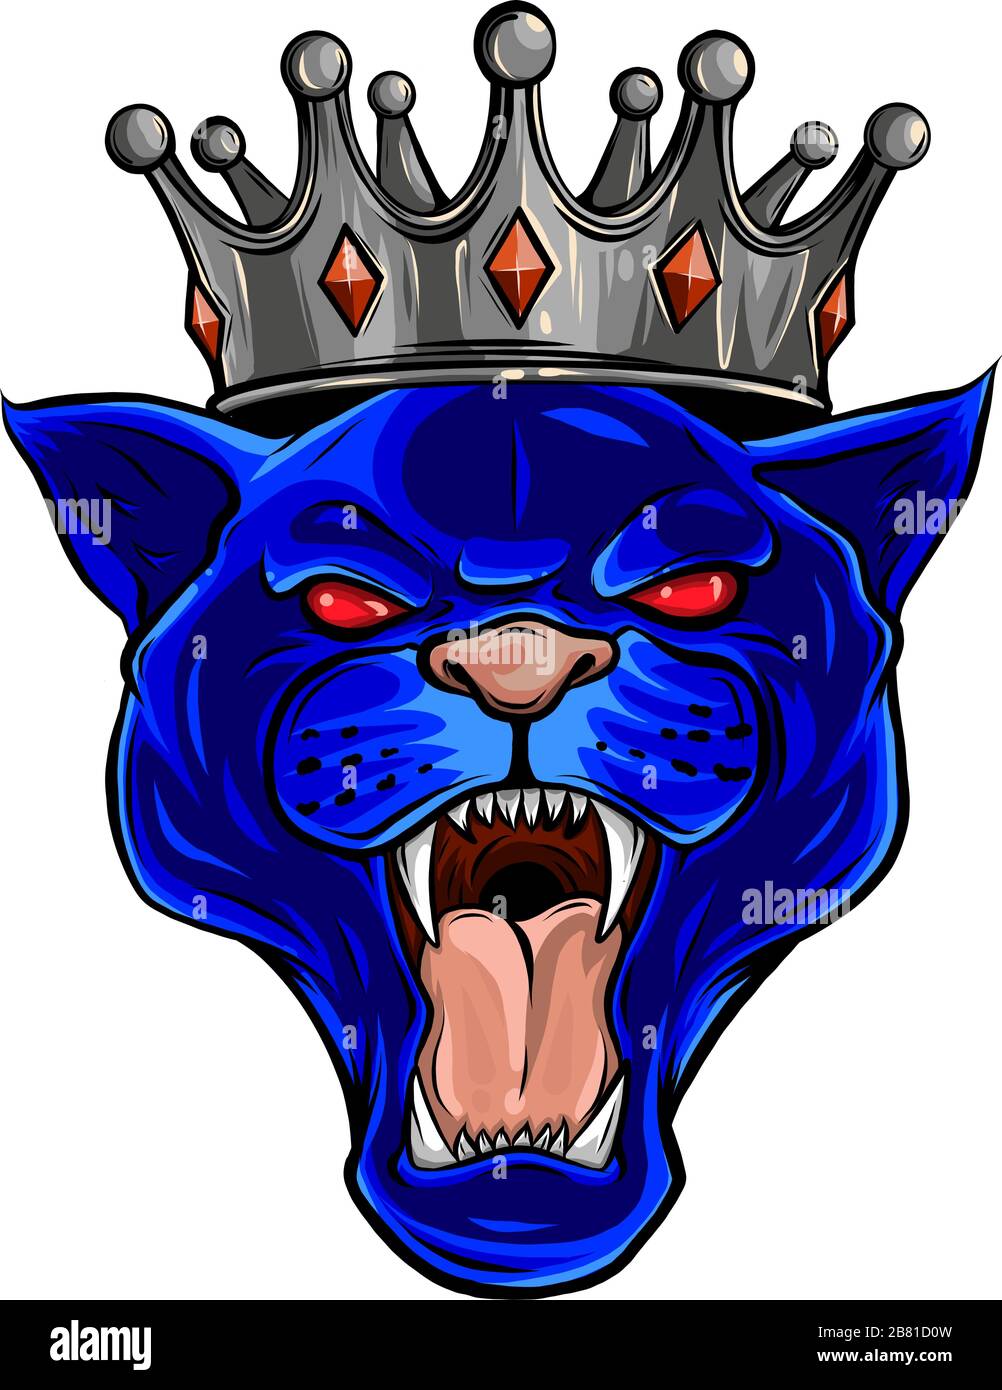 Cougar Panther Mascot Head Vector illustration Graphic Stock Vector